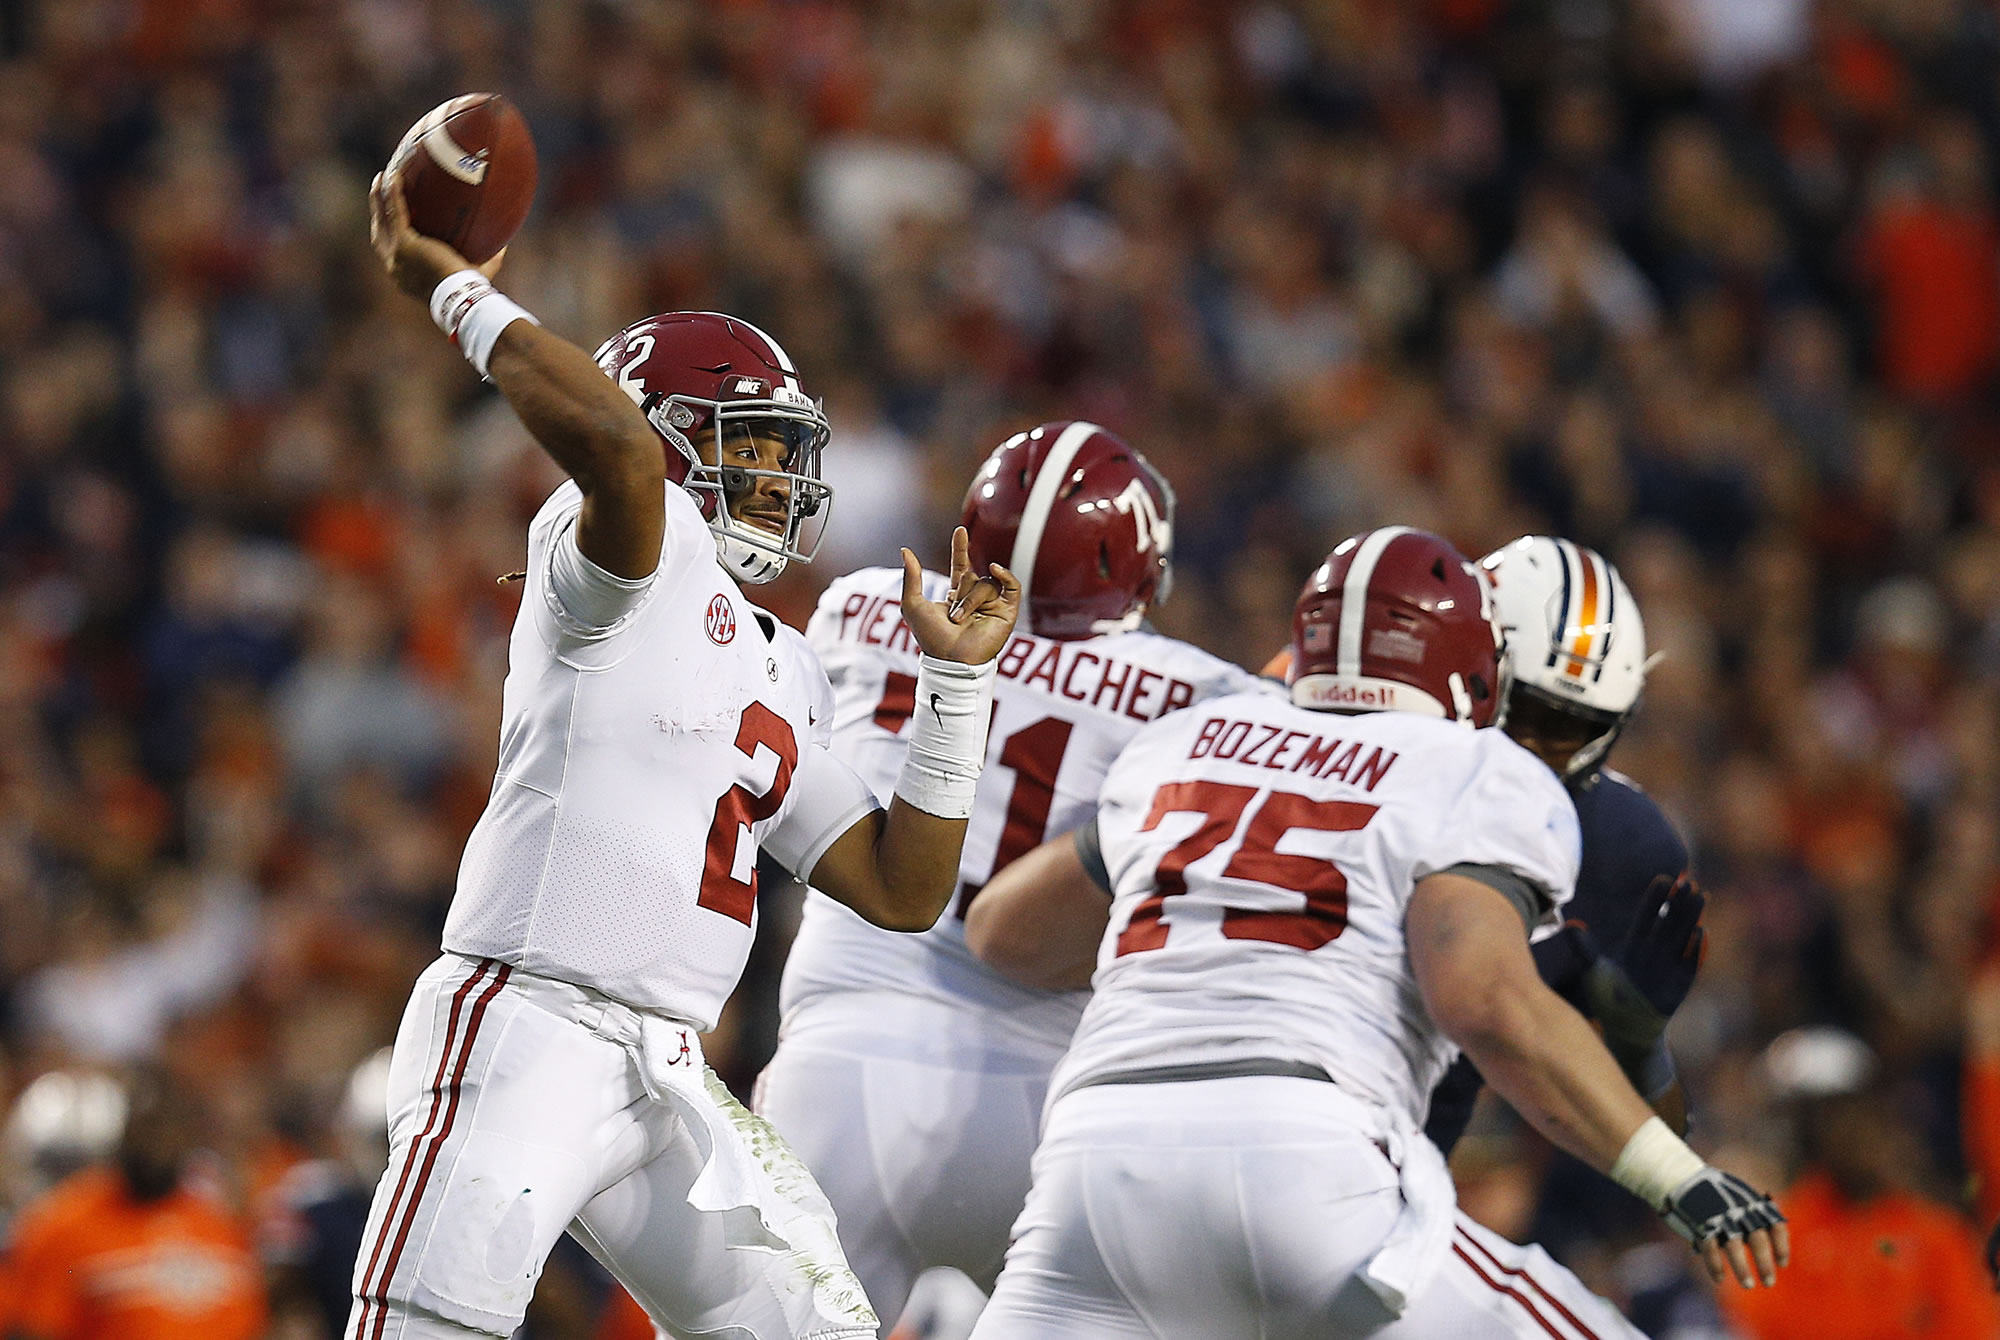 Alabama quarterback Jalen Hurts throws the ball during the second half of the Iron Bowl in Auburn, Ala. The Associated Press voters prefer Alabama over Ohio State. In the final Top 25 of the 2017 regular season, the Crimson Tide was No. 4 and the Buckeyes were No. 5.